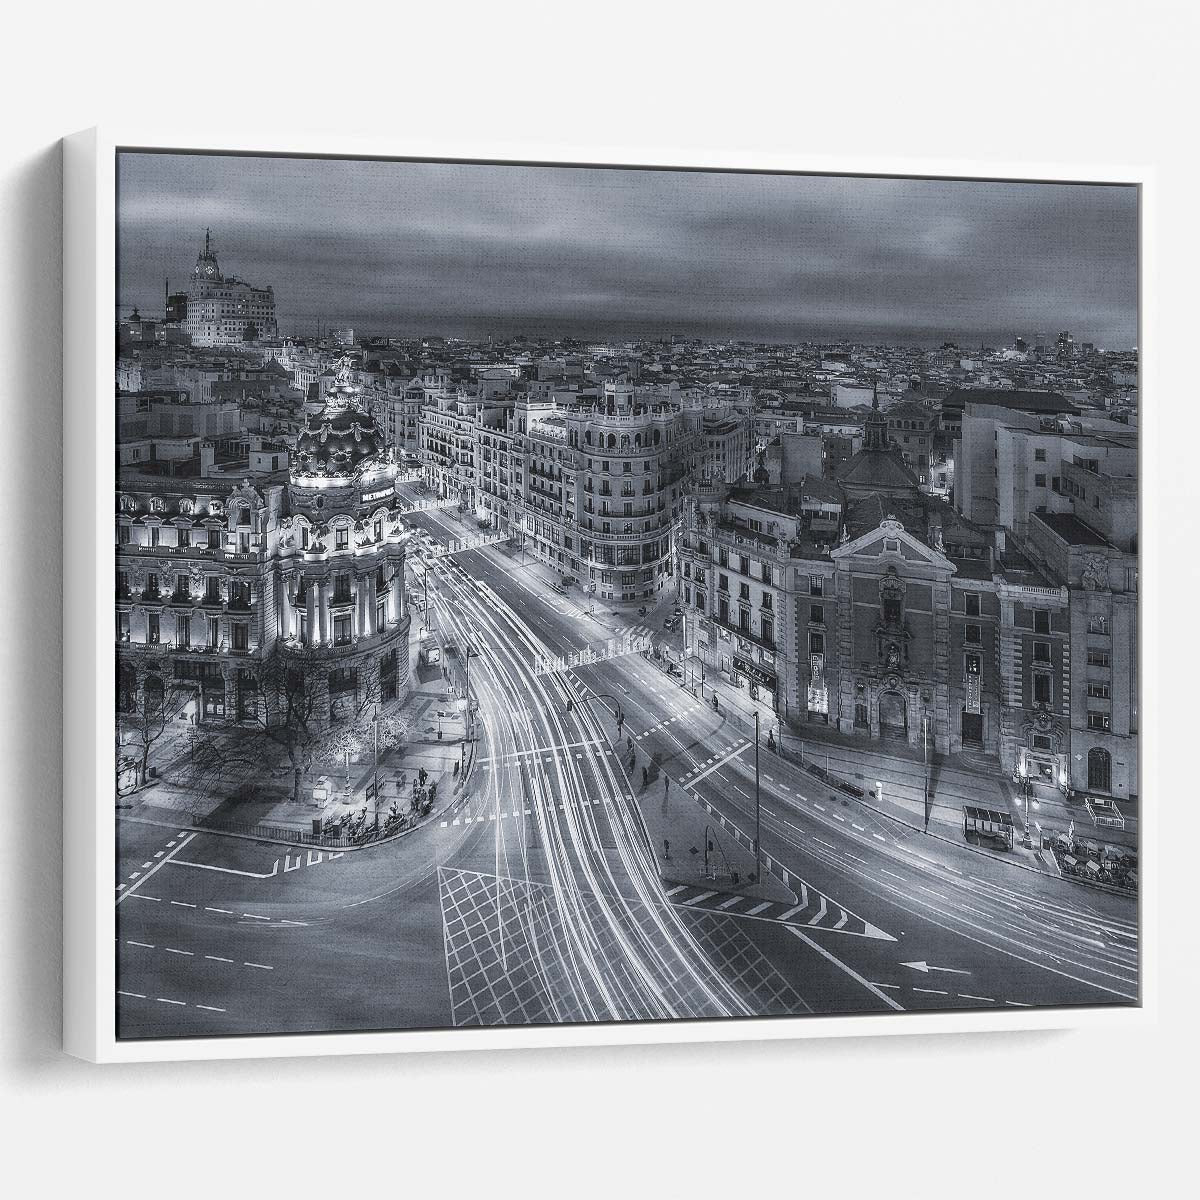 Madrid Nightscape Aerial Black & White Wall Art by Luxuriance Designs. Made in USA.